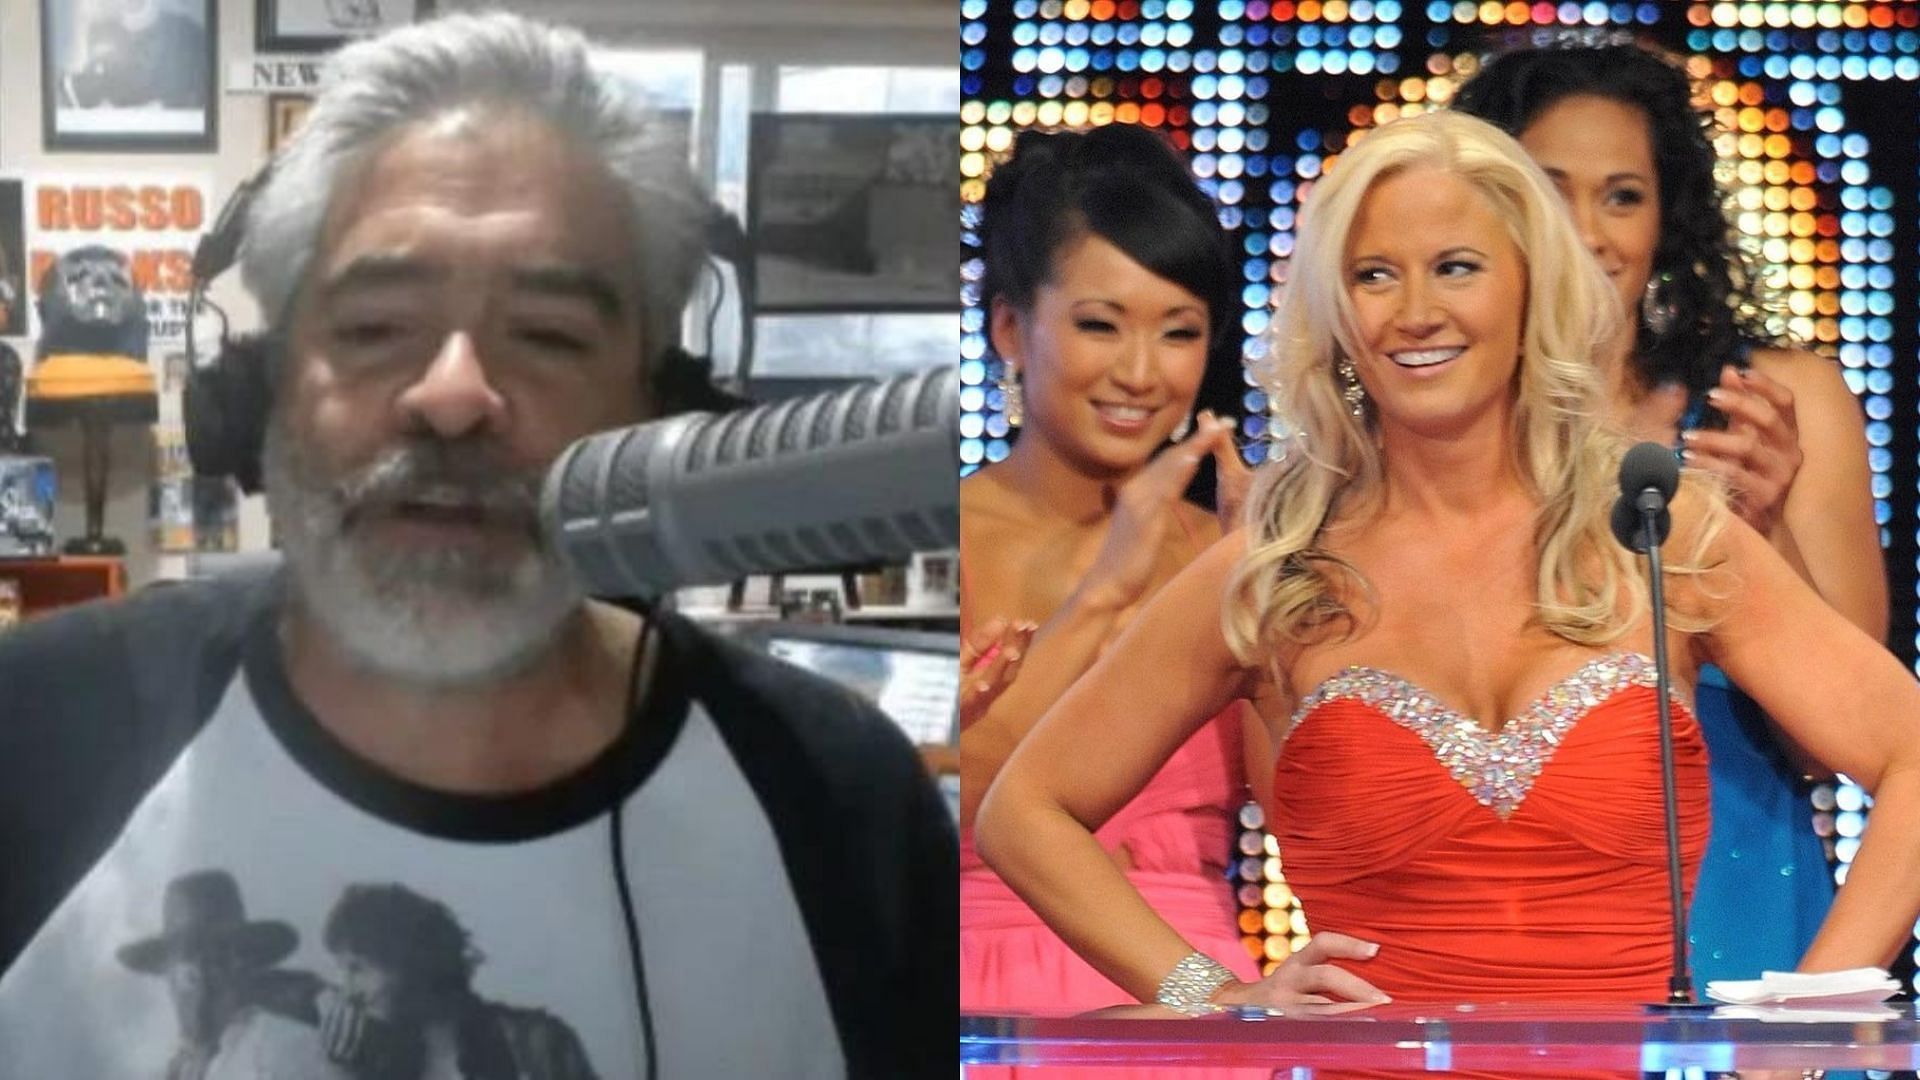 Vince Russo recalled a backstage incident involving Luna and Sunny